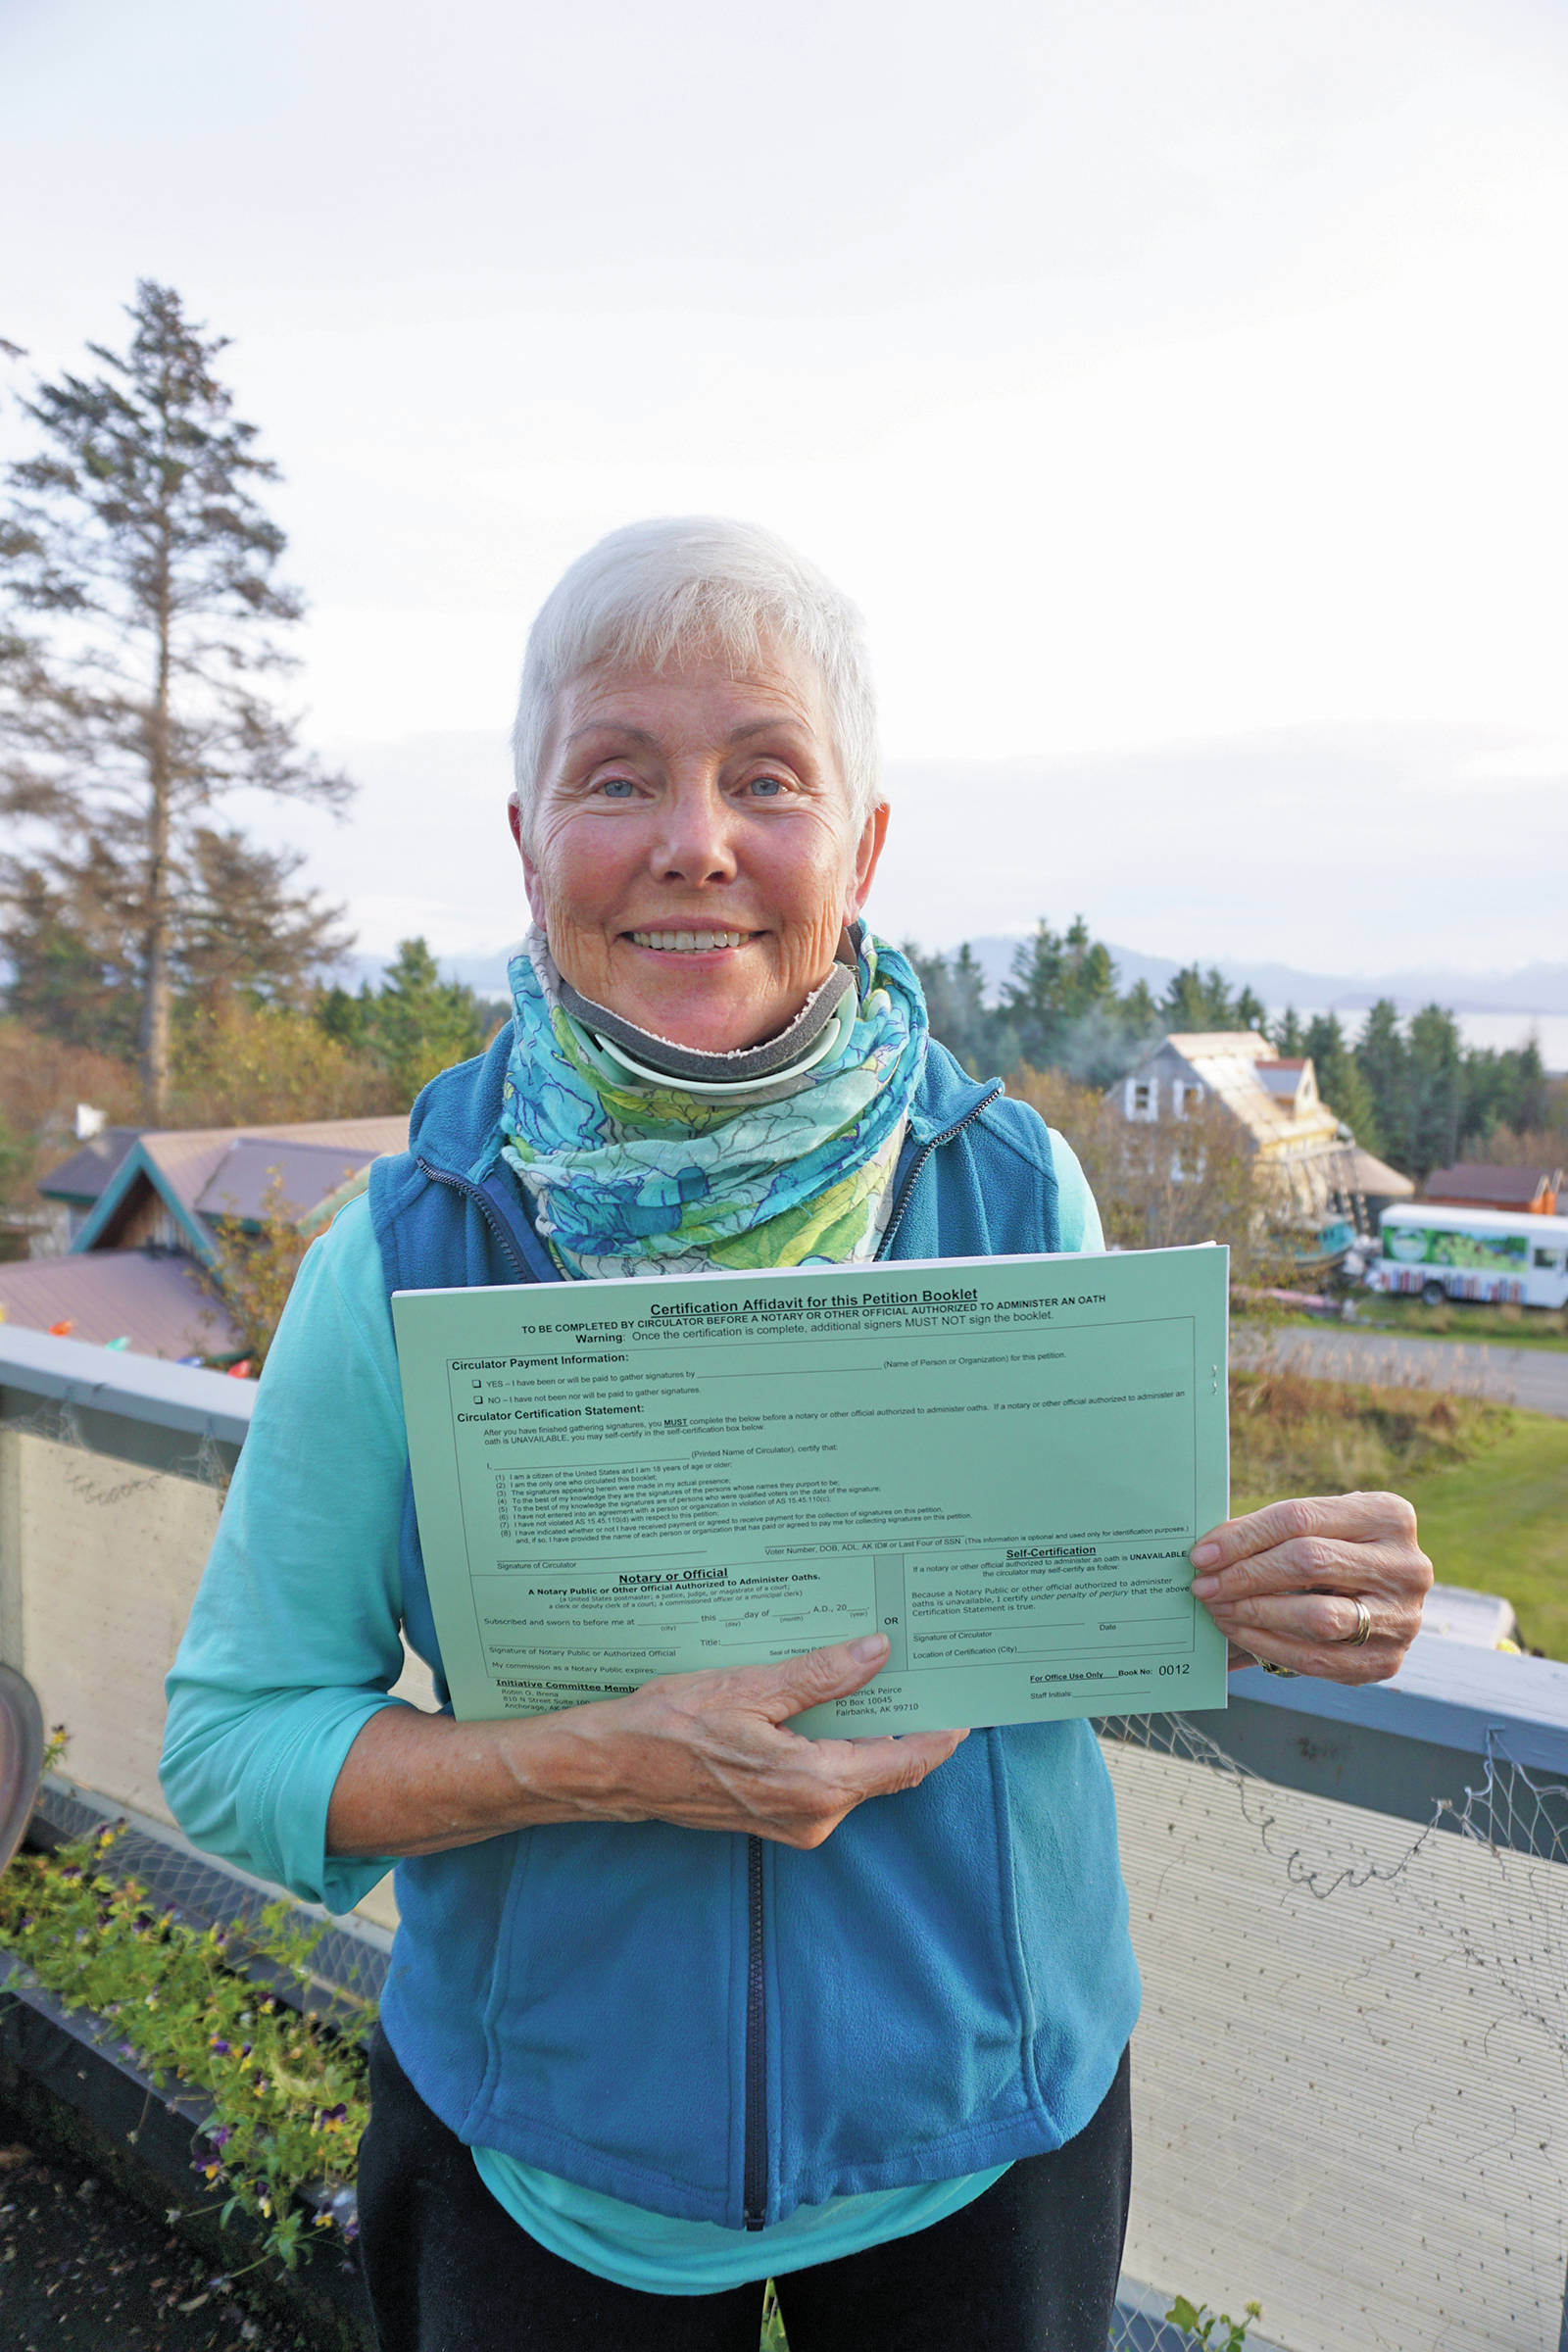 Fair Share Act sponsor Jane Angvik holds an initiative petition booklet she delivered to Homer, Alaska, on Oct 25, 2019. (Photo by Michael Armstrong/Homer News)